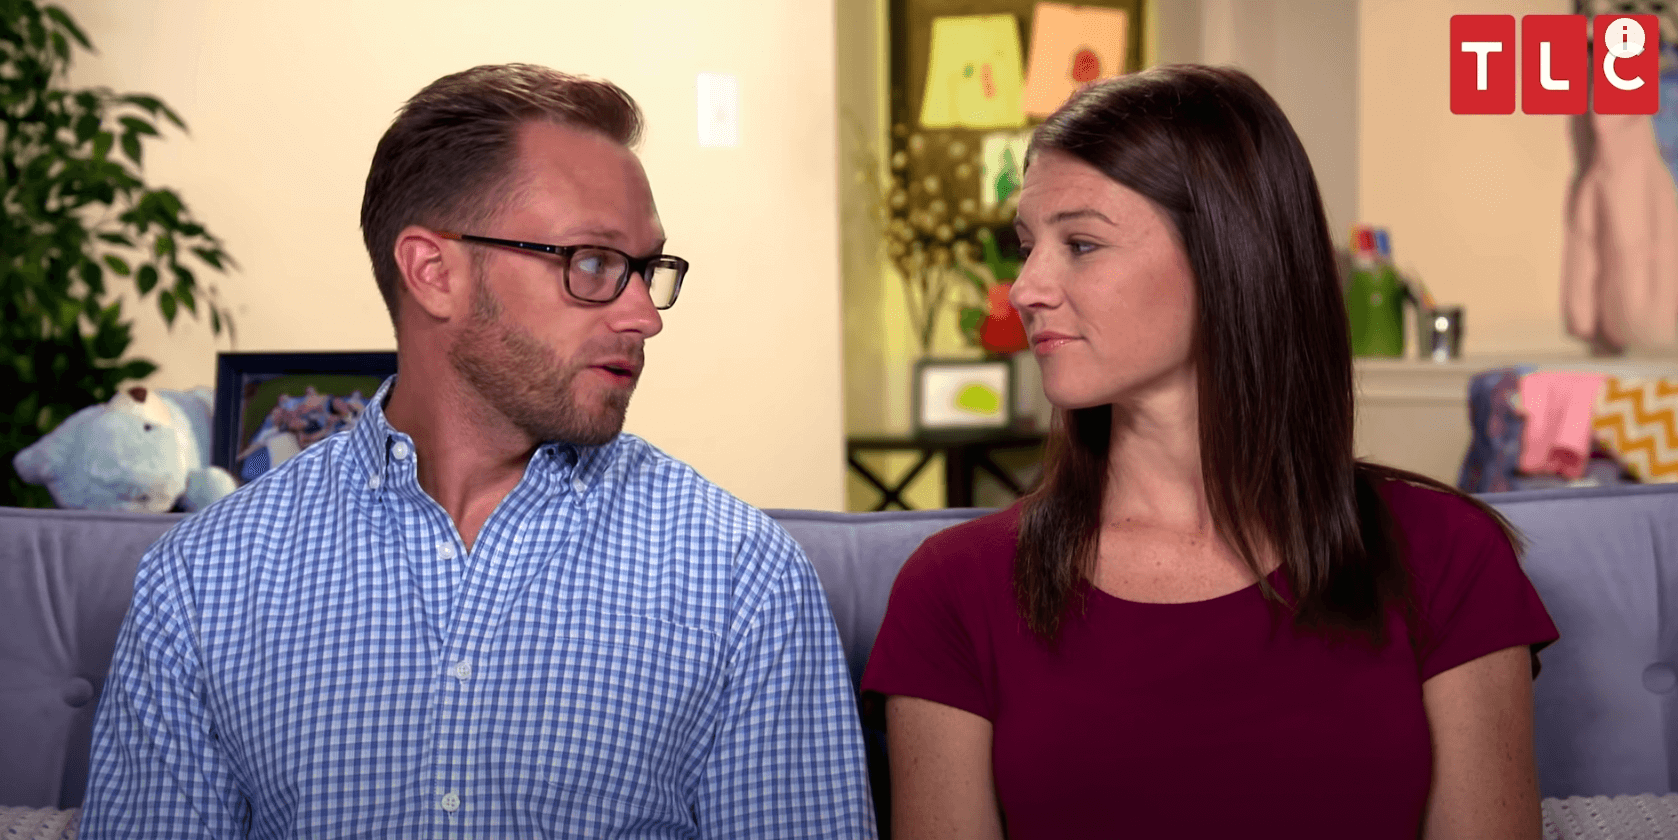 'OutDaughtered' stars Adam and Danielle Busby looking at each other while sitting in their house